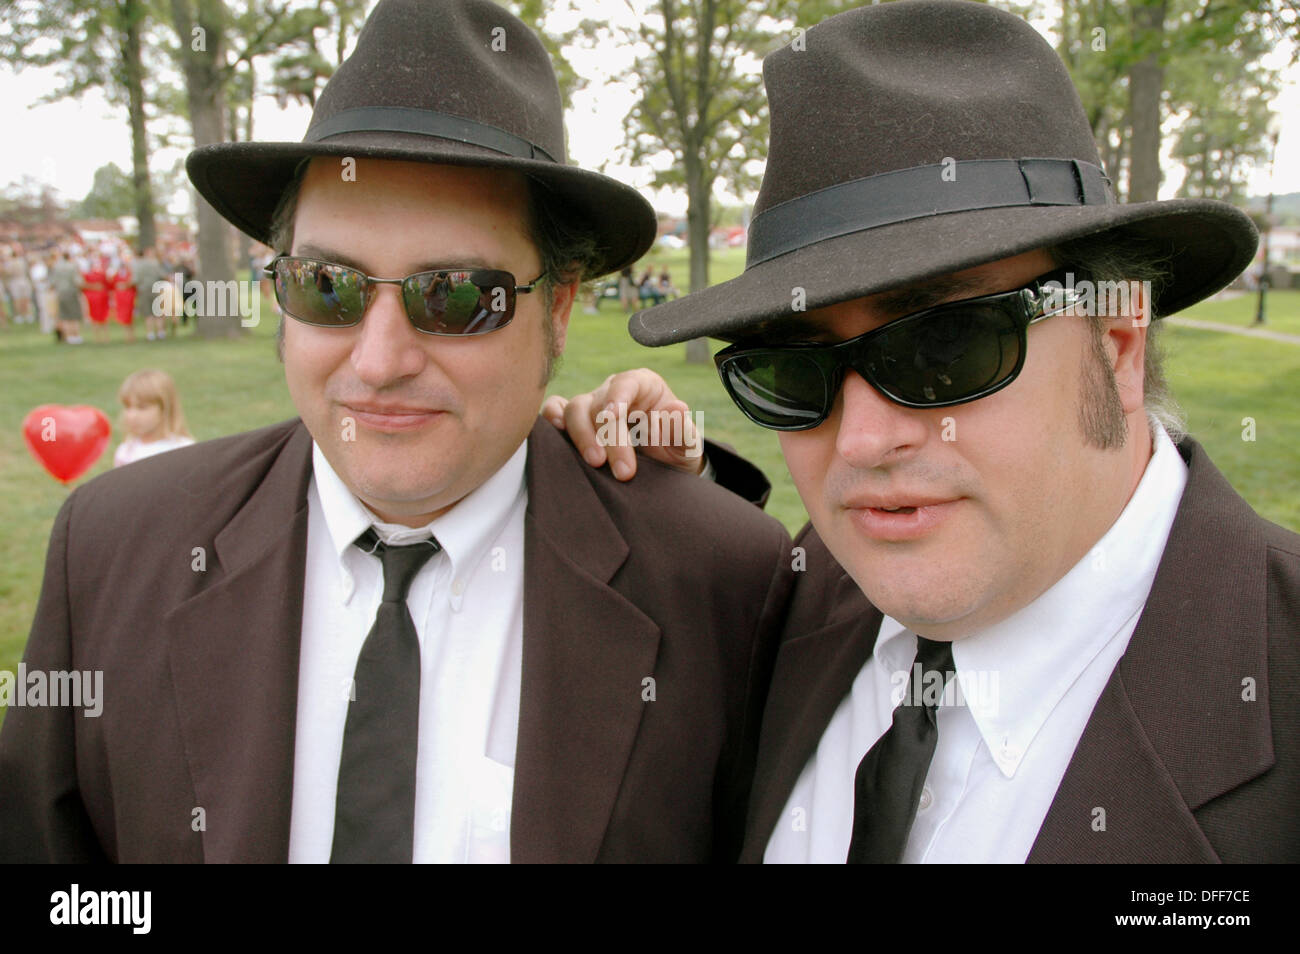 Twin brothers looking and dressing like Jake and Elwood Blues of